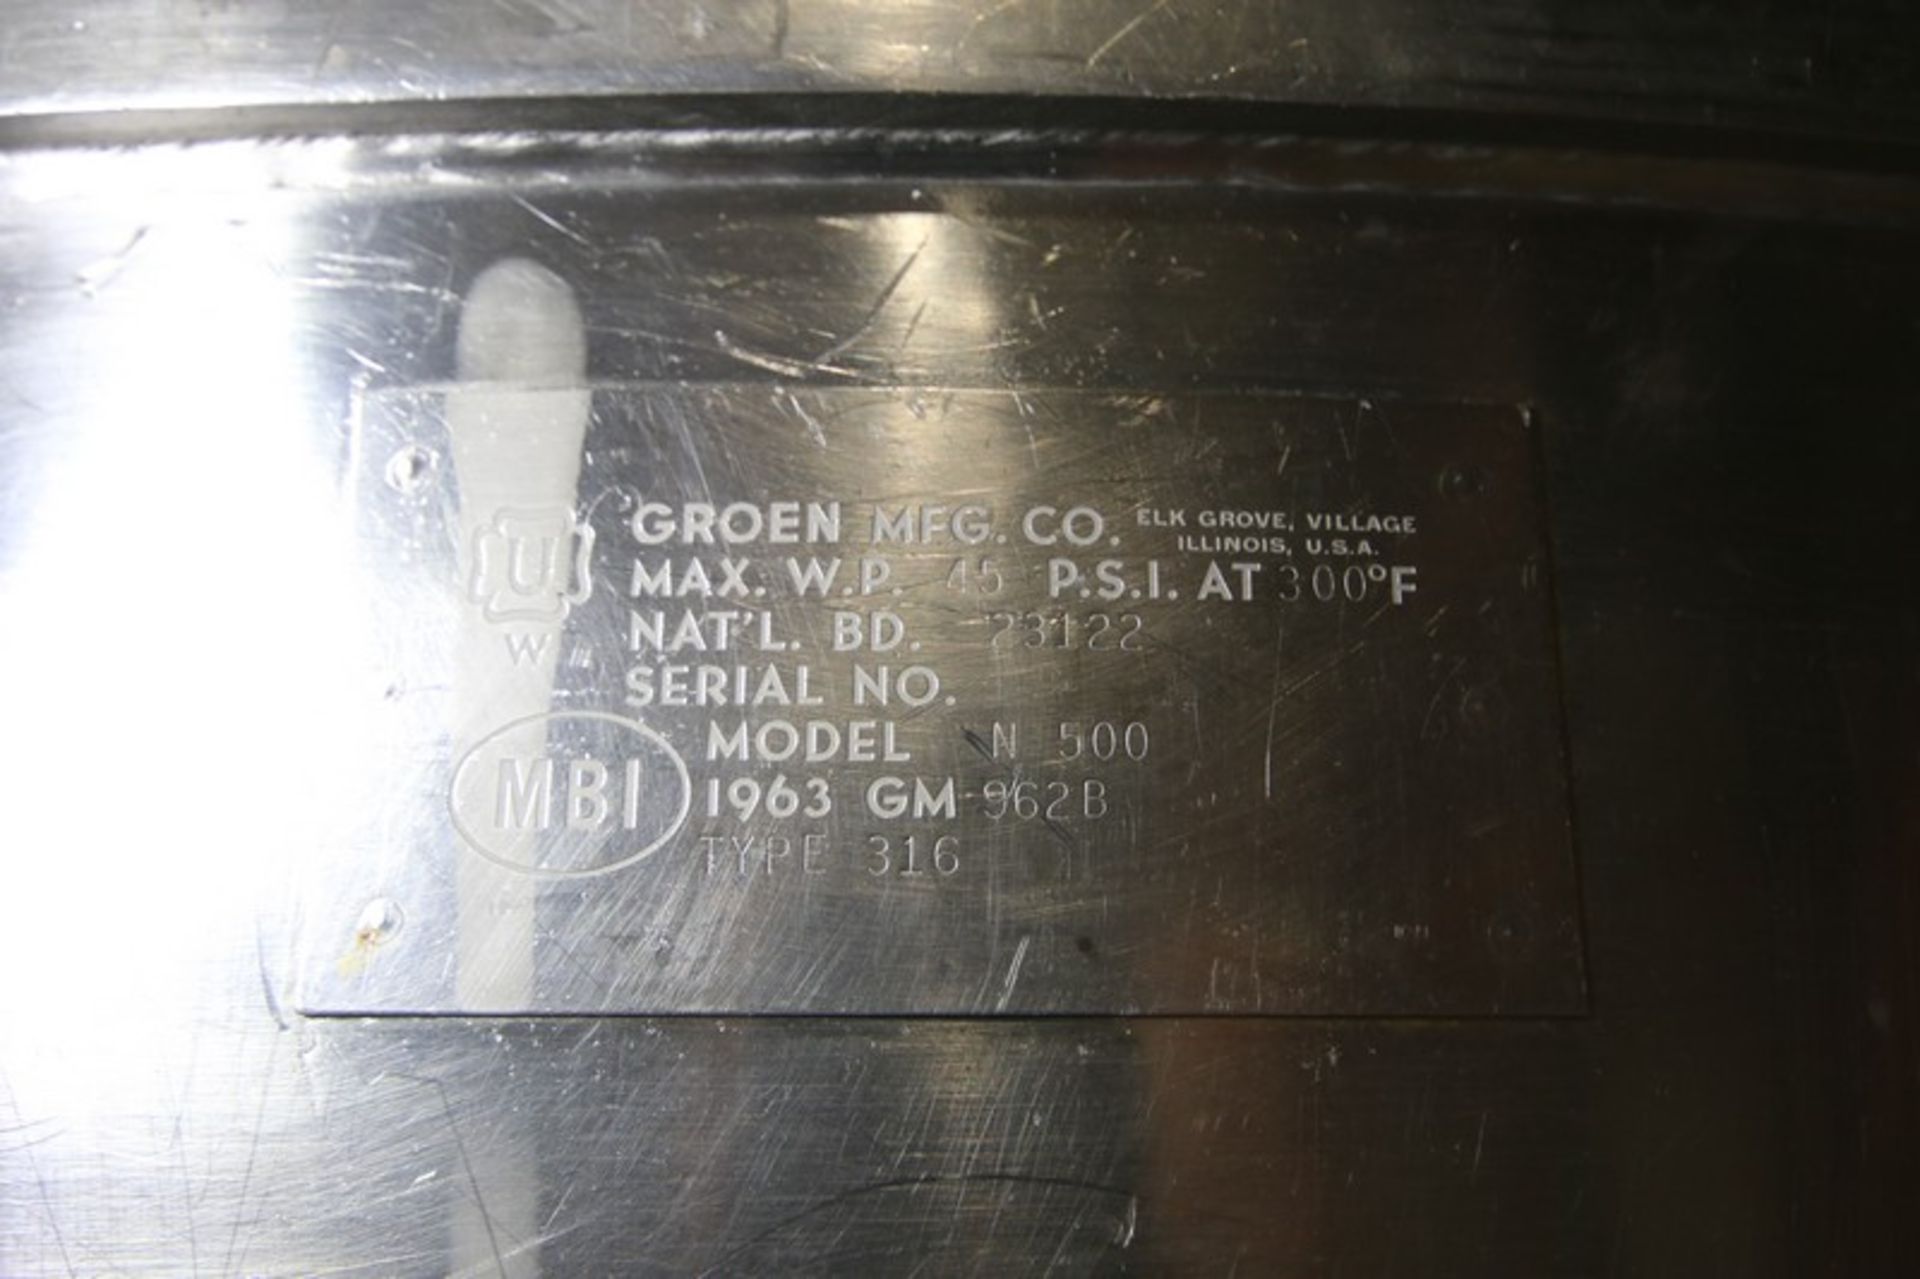 Groen 500 Gallon Jacketed S/S Kettle, Model 500, SN & BN 23122, with Bottom & Side Scrape Surface - Image 14 of 16